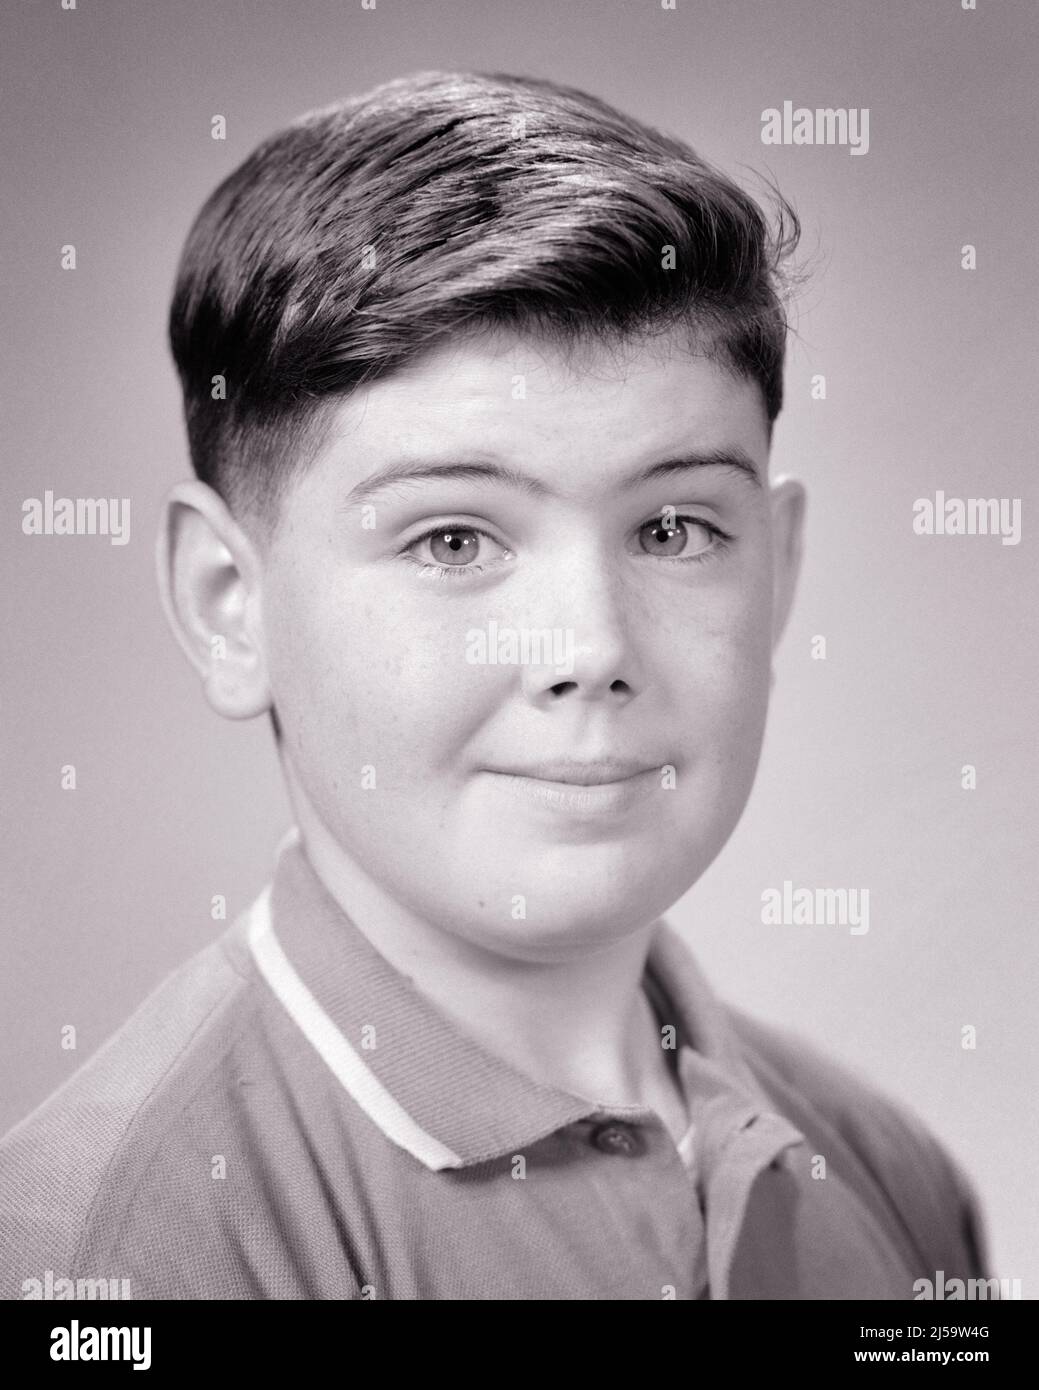 1950s PORTRAIT OF SMILING BRUNETTE BOY LOOKING AT CAMERA - j10384 HAR001 HARS BRIGHT WELLNESS HEAD AND SHOULDERS CHEERFUL AMUSED KNOWLEDGE PRIDE SMILES CONCEPTUAL ALERT JOYFUL STYLISH PLEASANT CHARMING IDEAS JUVENILES PRE-TEEN PRE-TEEN BOY BLACK AND WHITE CAUCASIAN ETHNICITY HAR001 OLD FASHIONED Stock Photo